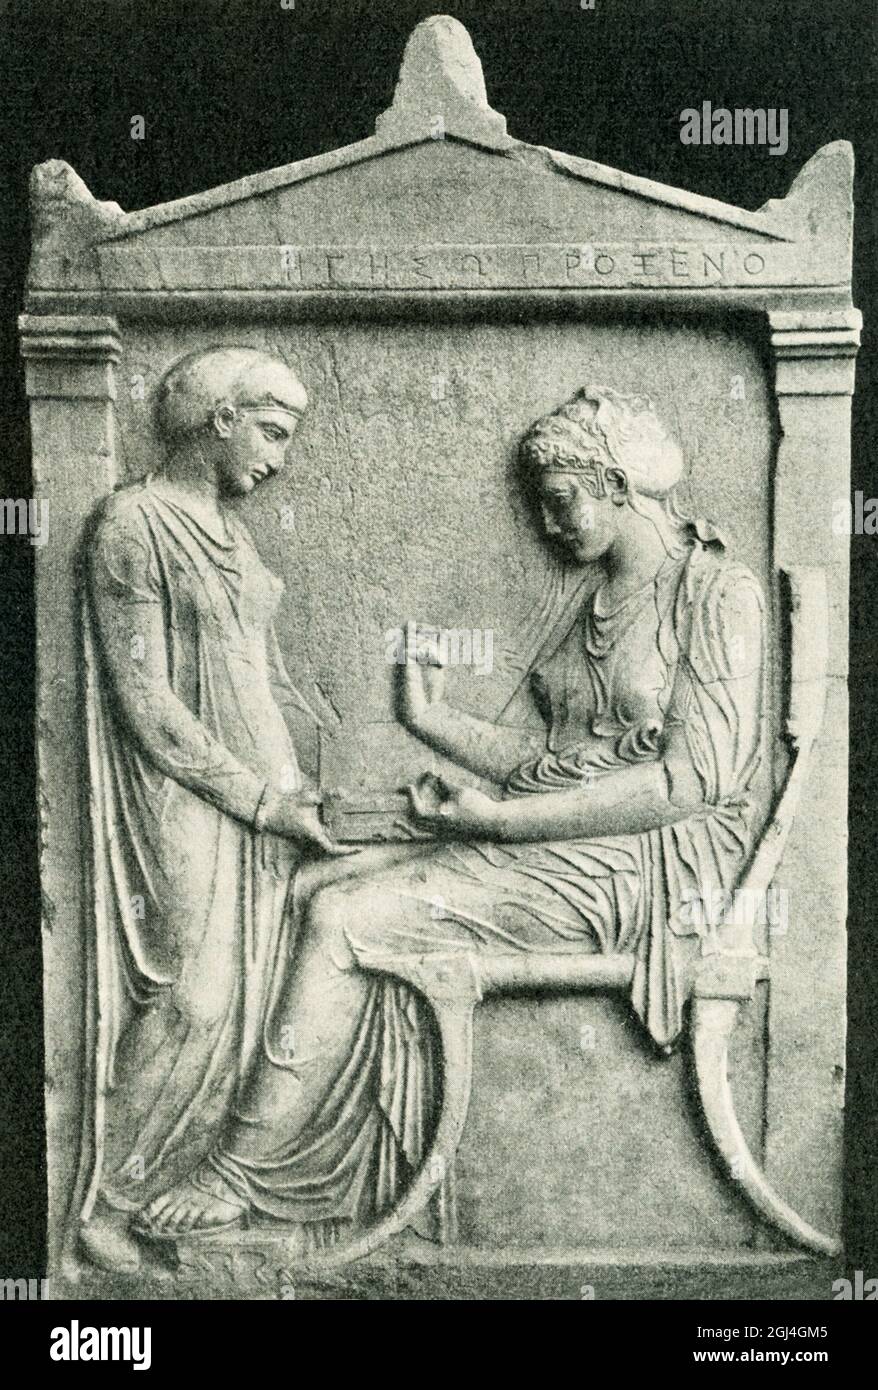 The Grave Stele of Hegeso (c. 410–400 BC) is one of the best surviving examples of Attic grave stelae. A contemplative seated woman picks jewelry from a box held for her by a standing slave-girl. The jewelry would have been painted on to the marble surface. The deceased woman’s name is inscribed above (Hegeso daughter of Proxenos). The relief was found in the ancient cemetery of Athens, the Kerameikos. From around 450, Athenian funerary monuments increasingly depicted women, as their civic importance increased. Stock Photo